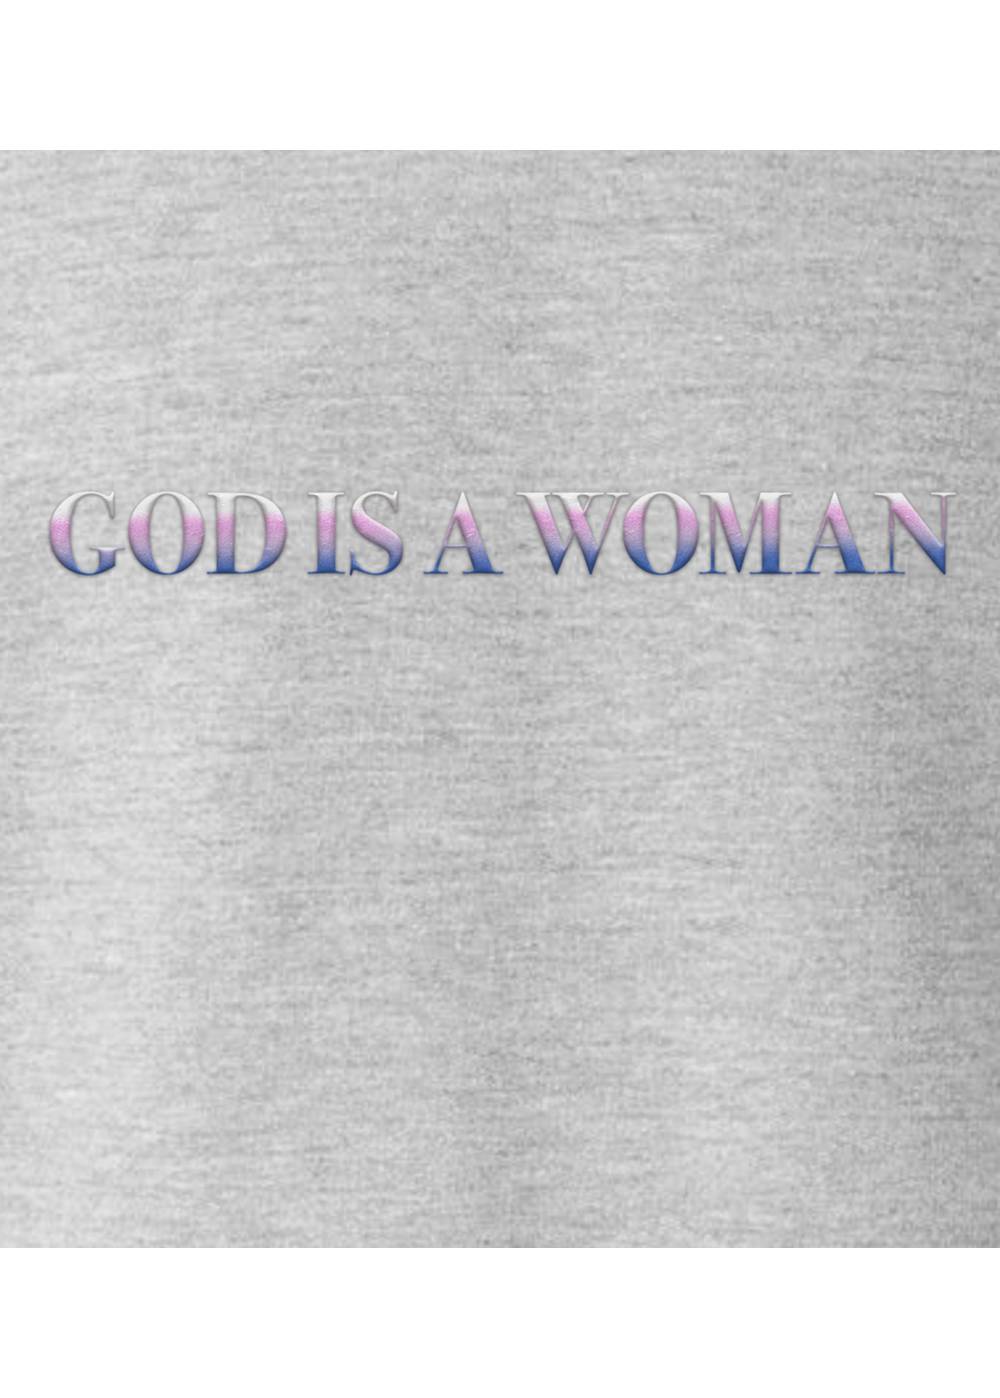 god is a woman 5 year anniversary crewneck front detail